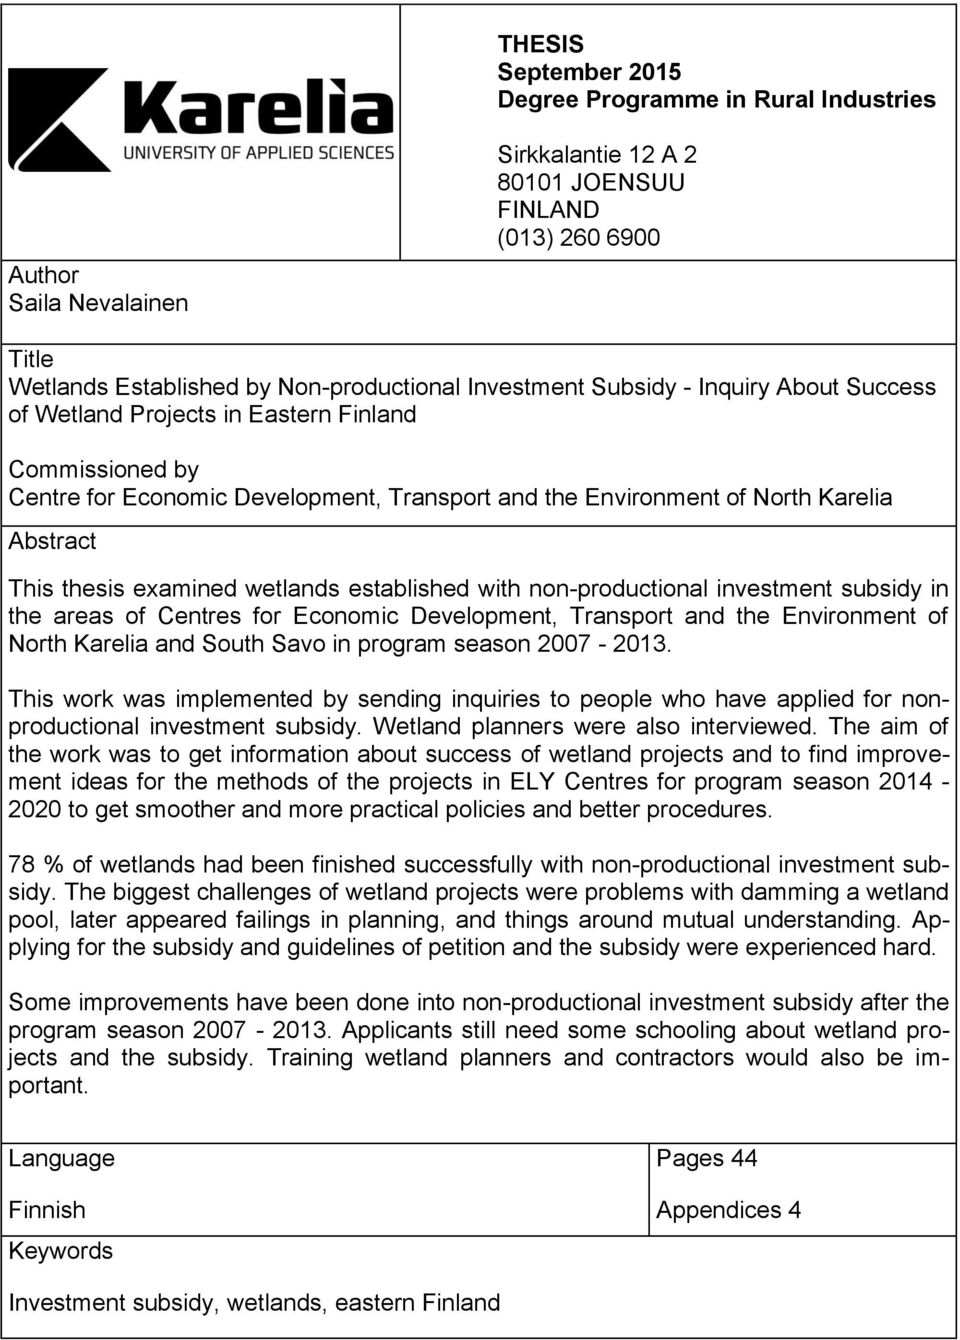 wetlands established with non-productional investment subsidy in the areas of Centres for Economic Development, Transport and the Environment of North Karelia and South Savo in program season